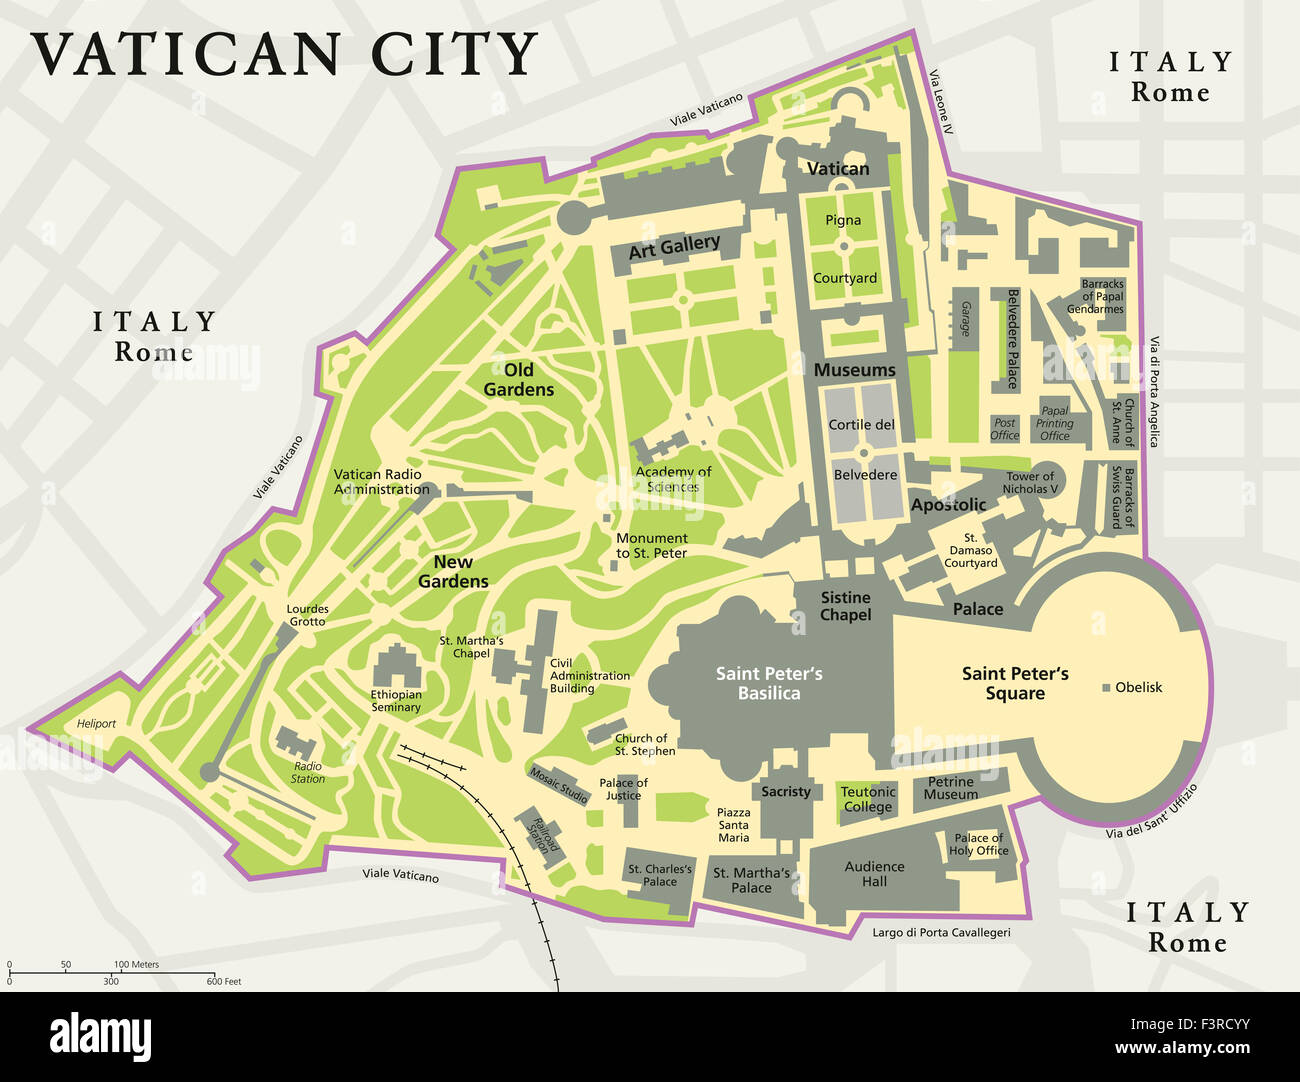 Vatican city political map. City state in Rome, Italy with national borders, important buildings, sights and gardens. Stock Photo